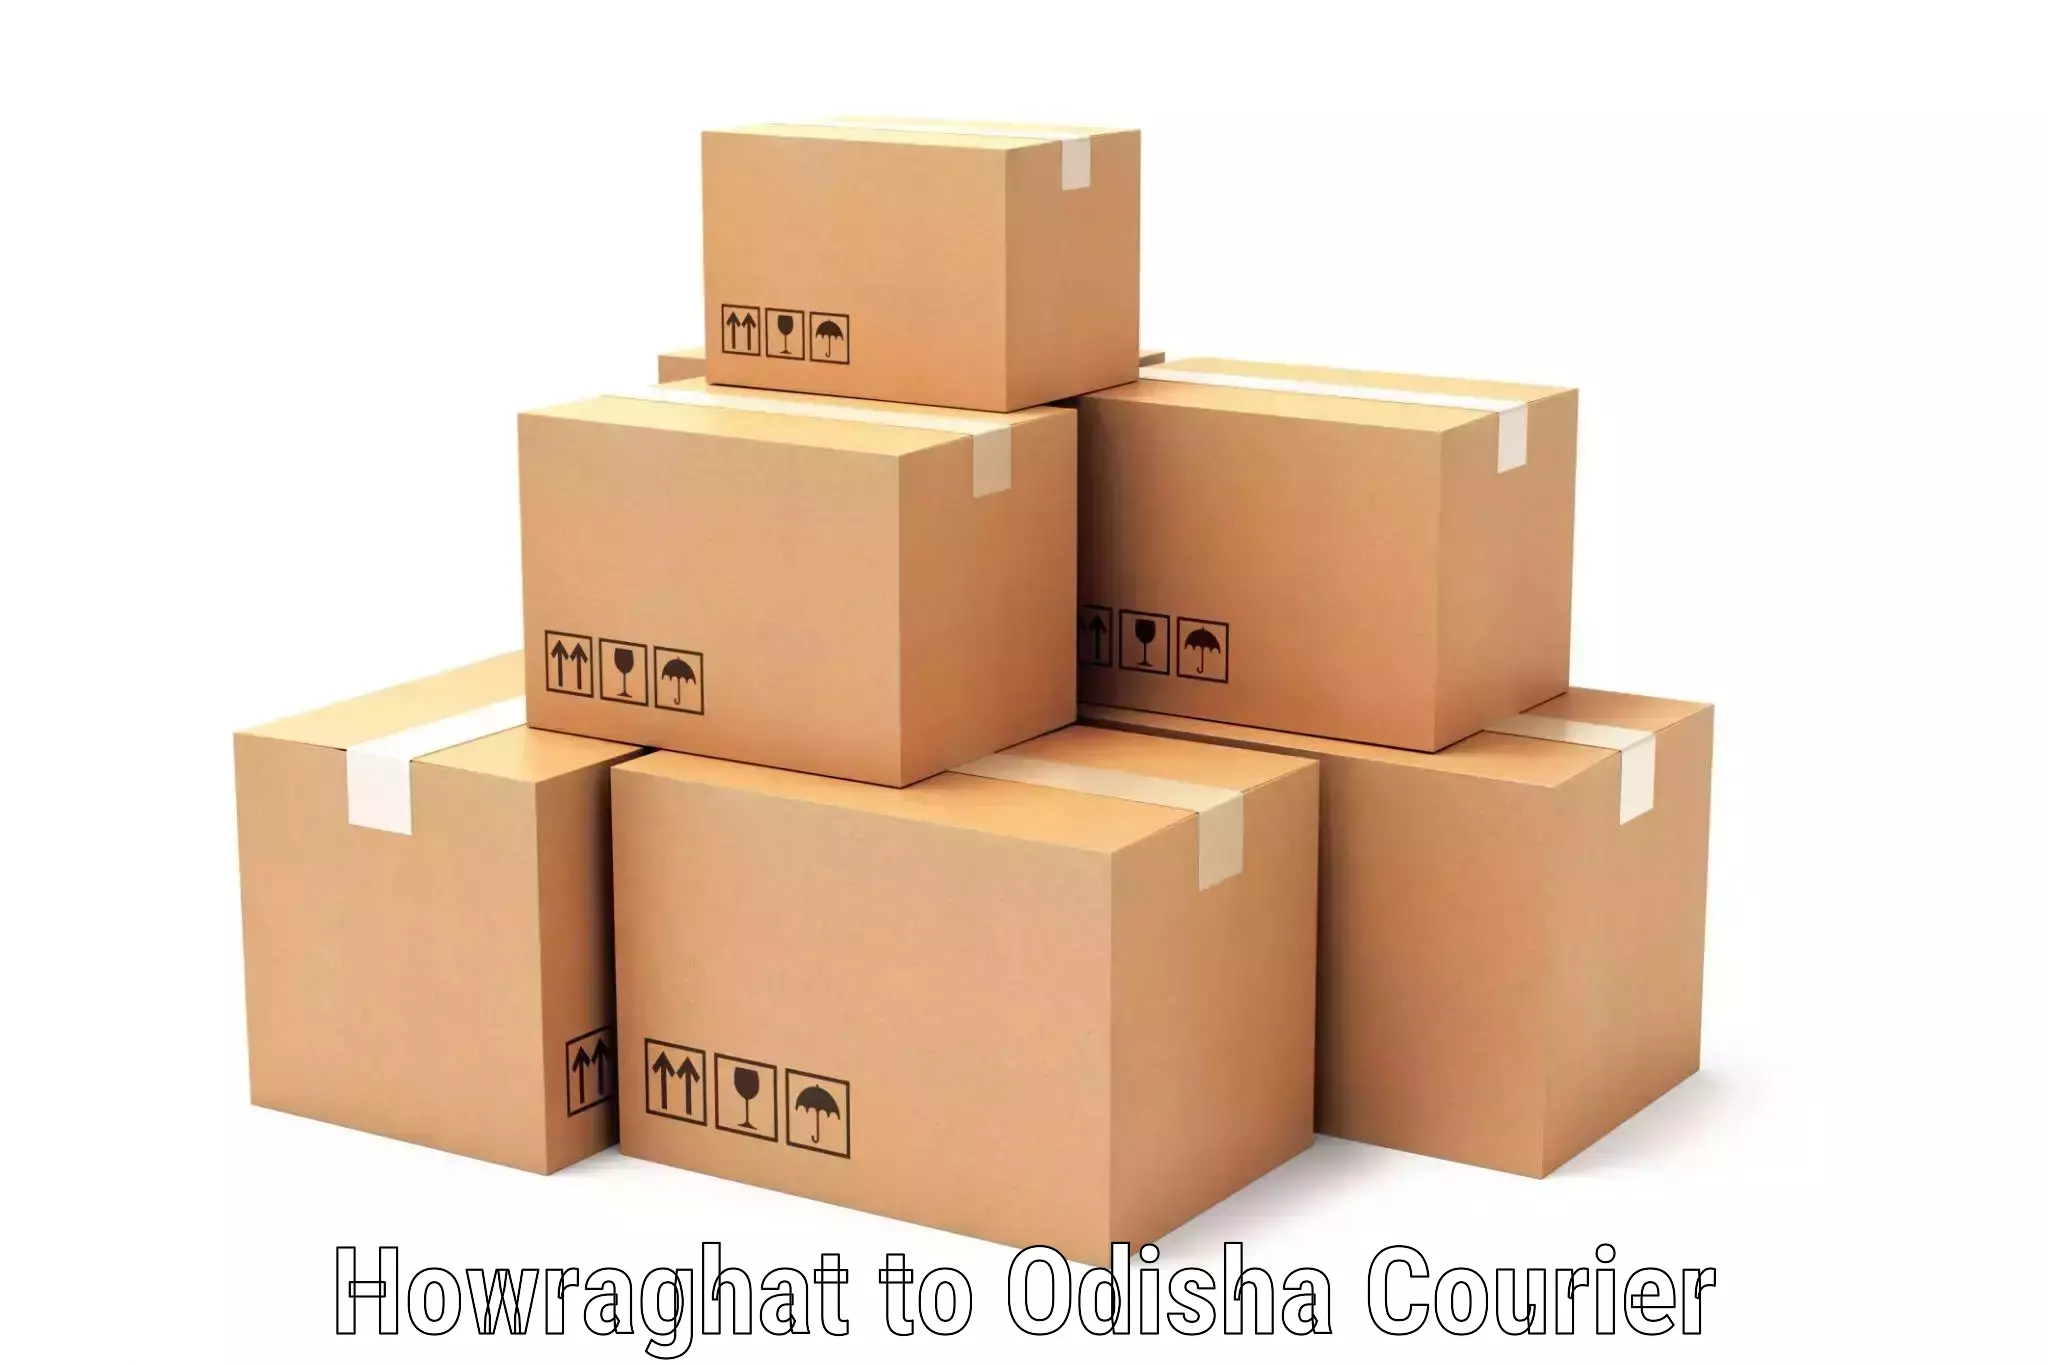 E-commerce shipping Howraghat to Chatrapur